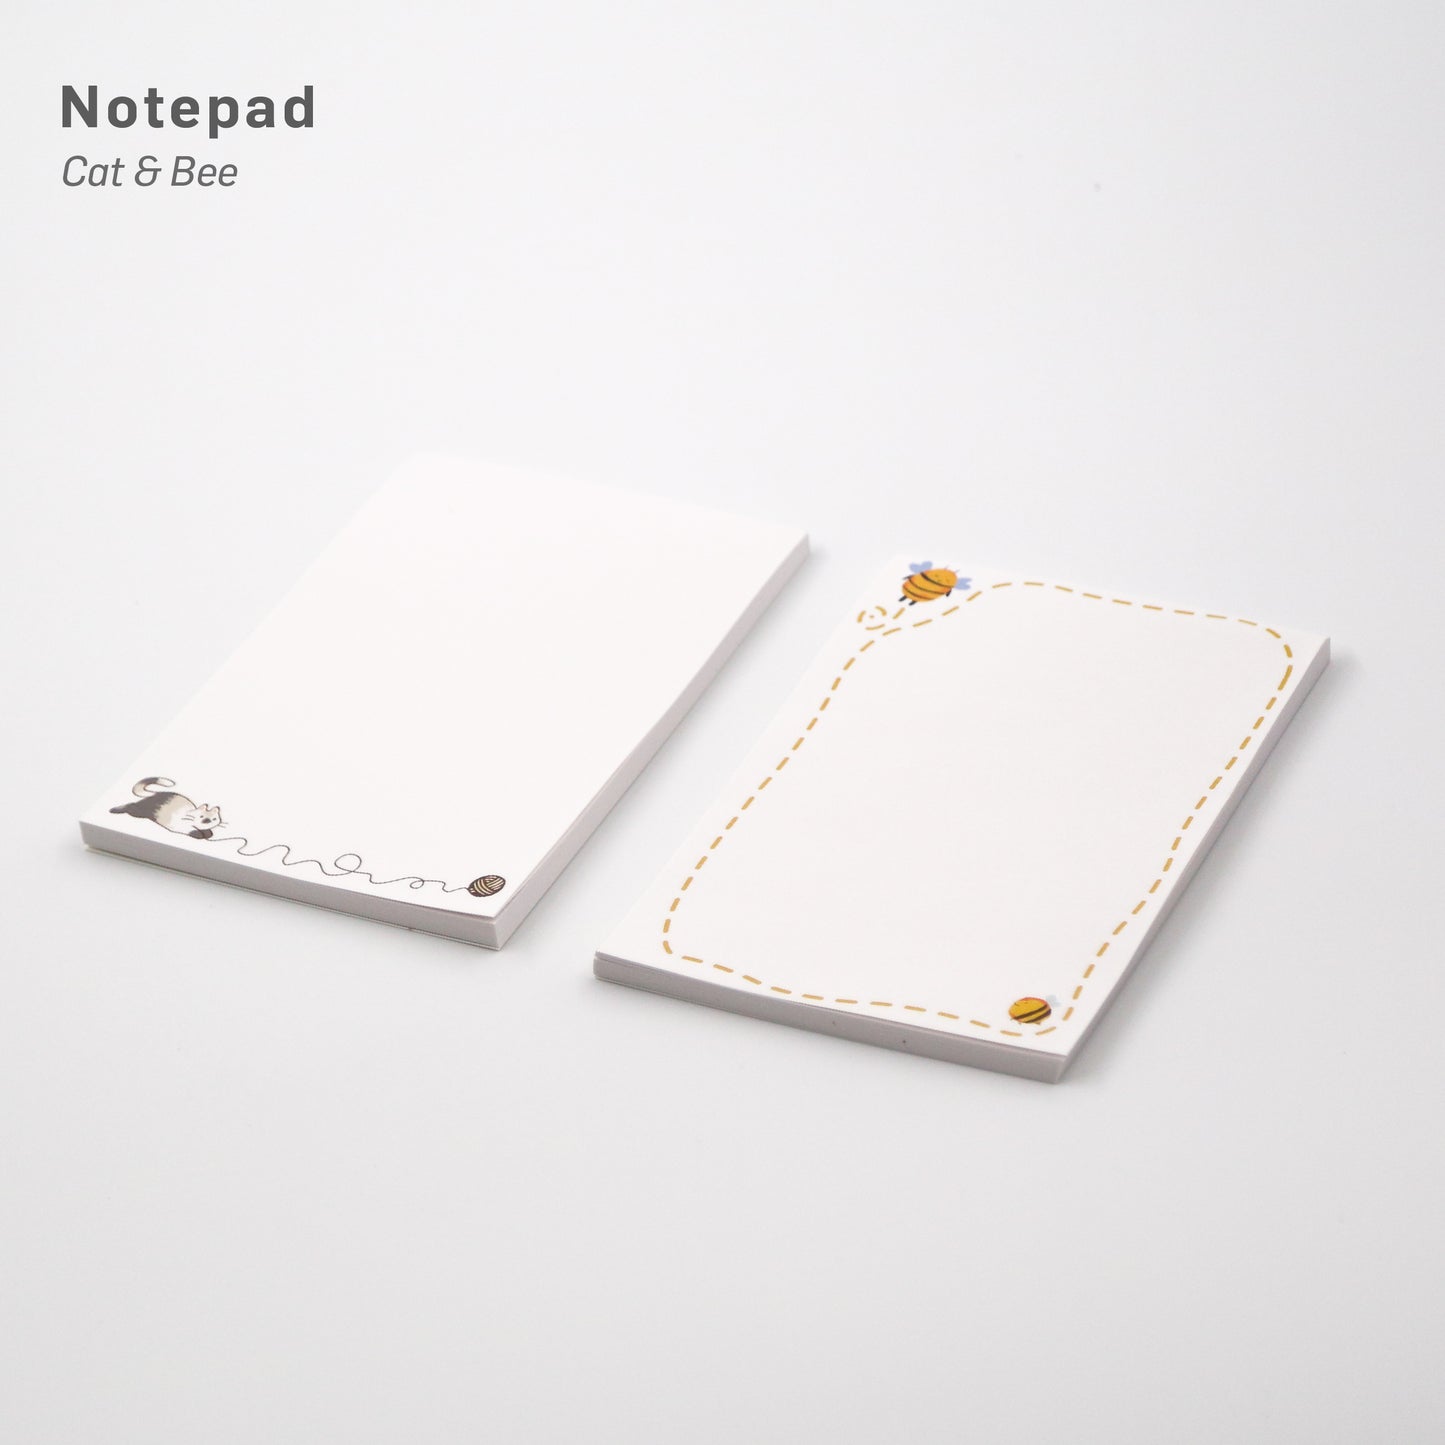 Notepads - Set of 4 different designs